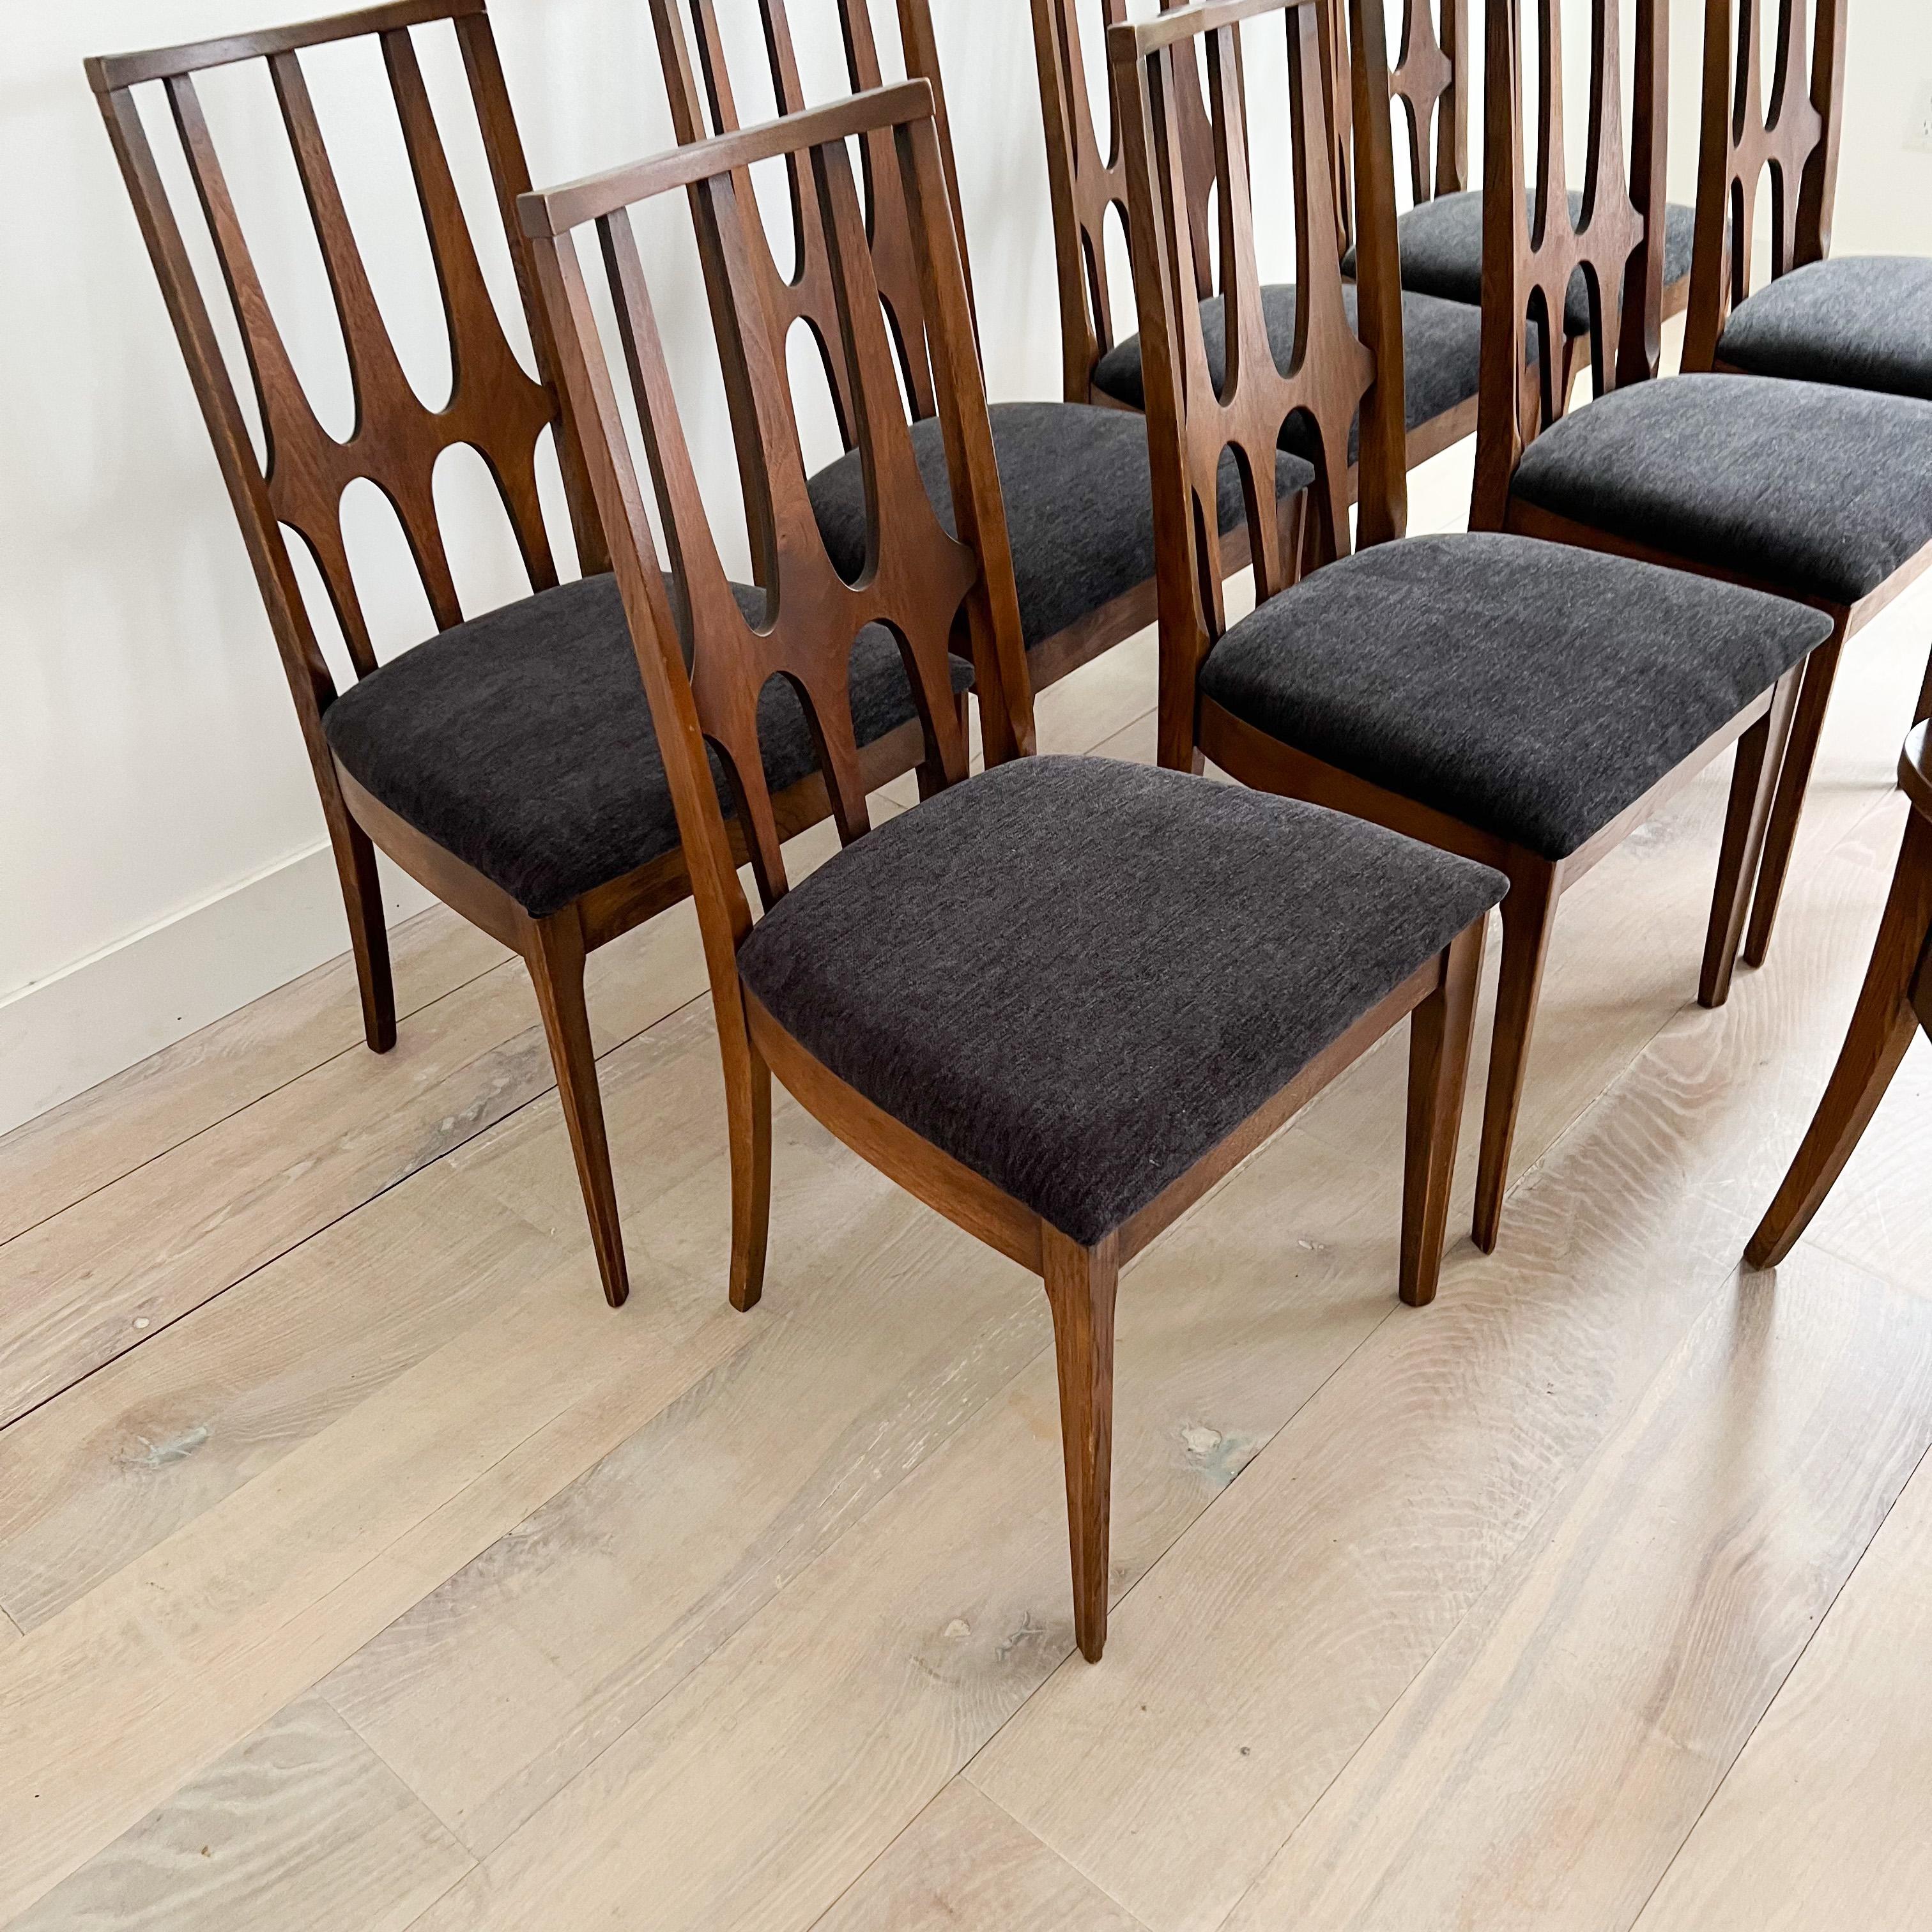 Set of 10 Mid-Century Modern Broyhill Brasilia Dining Chairs W/ New Upholstery 9